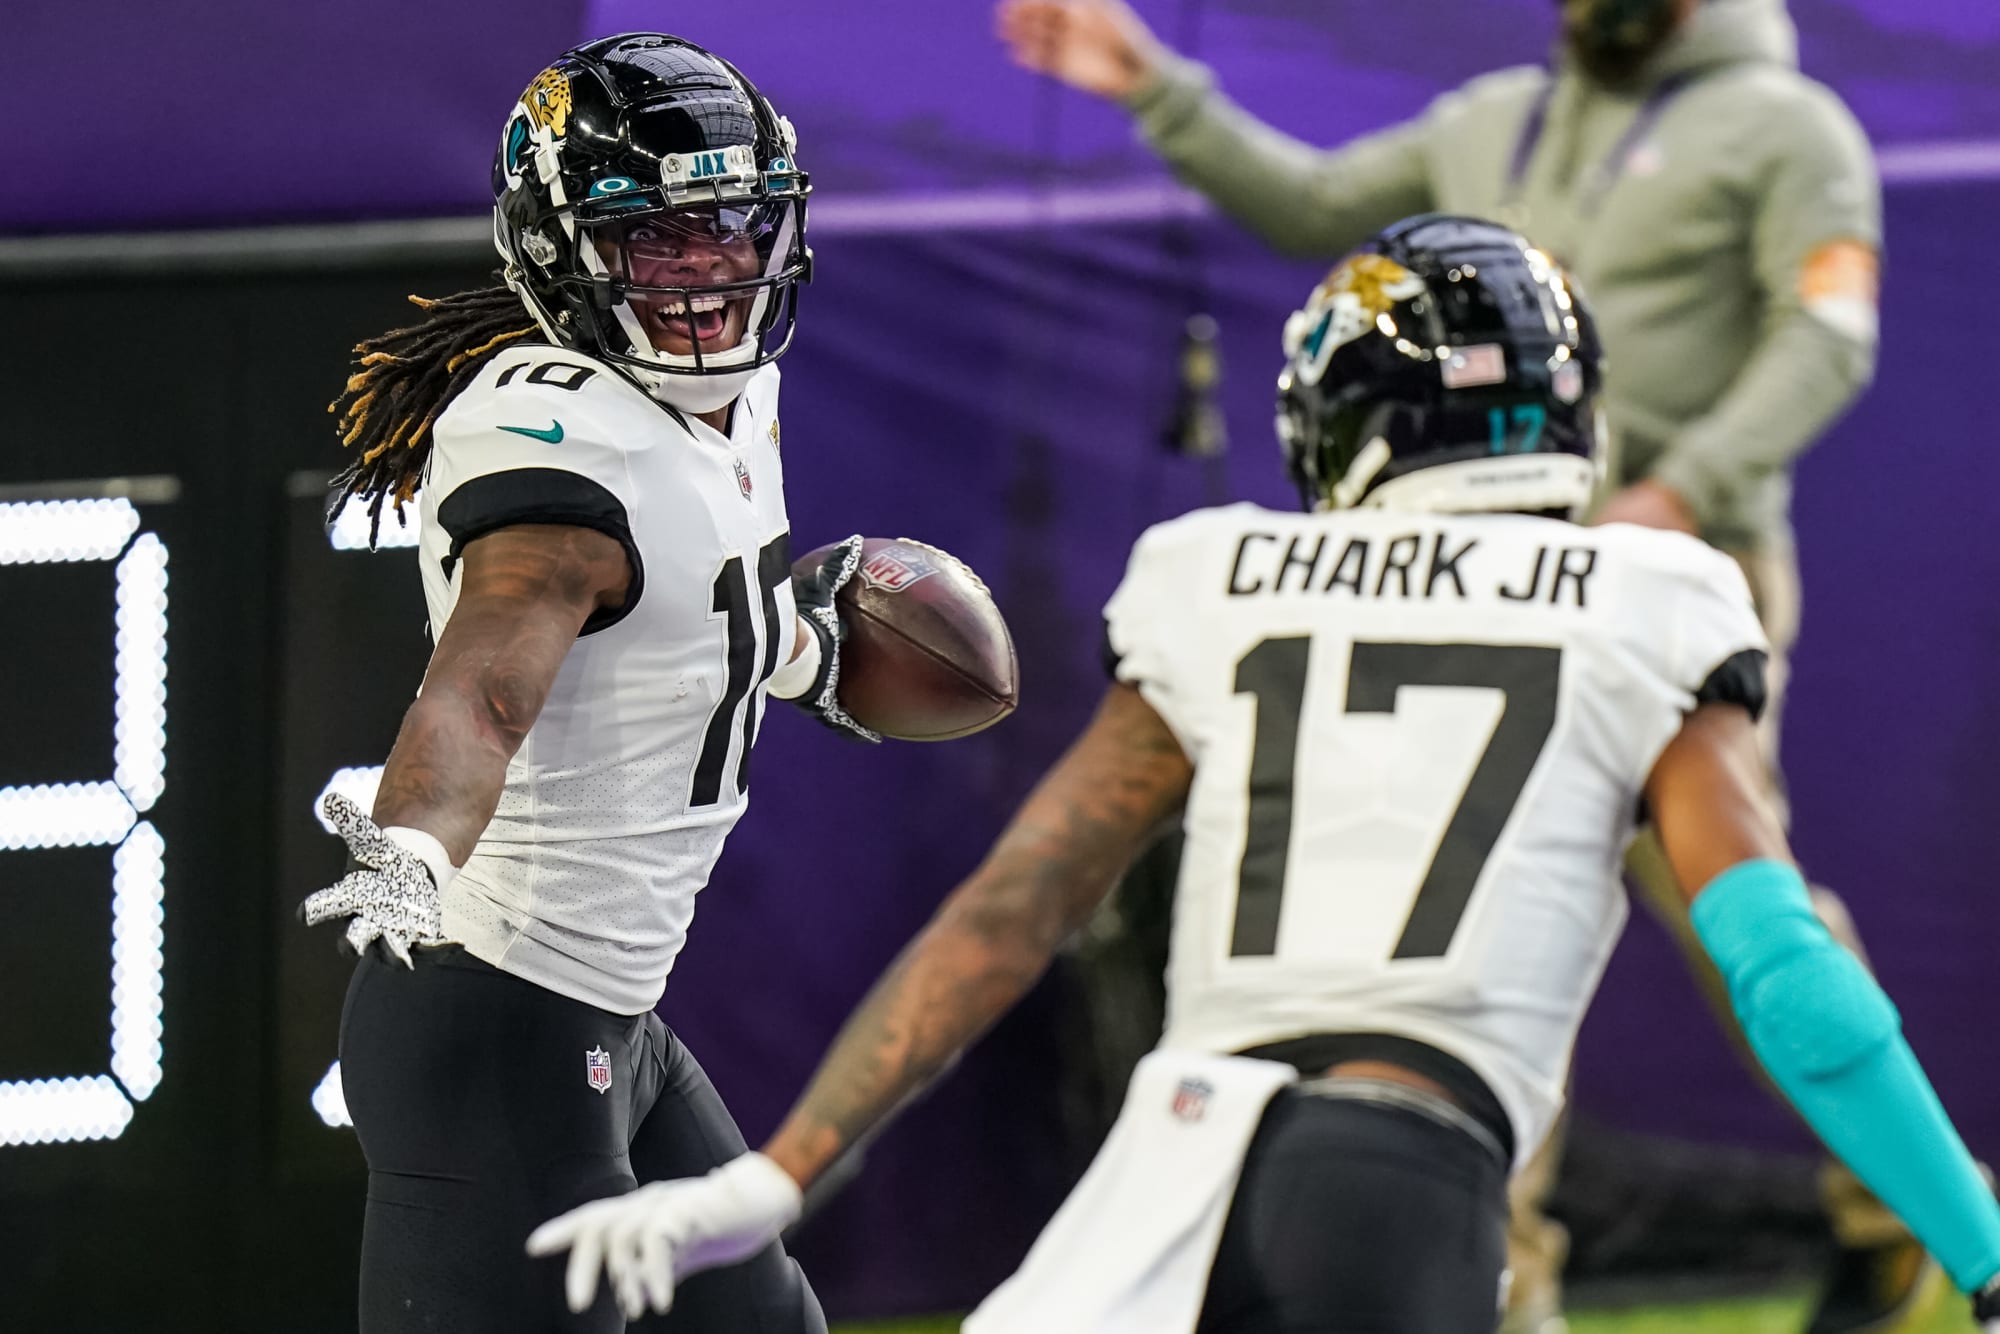 Ranking Jaguars wide receivers following the 2021 NFL Draft